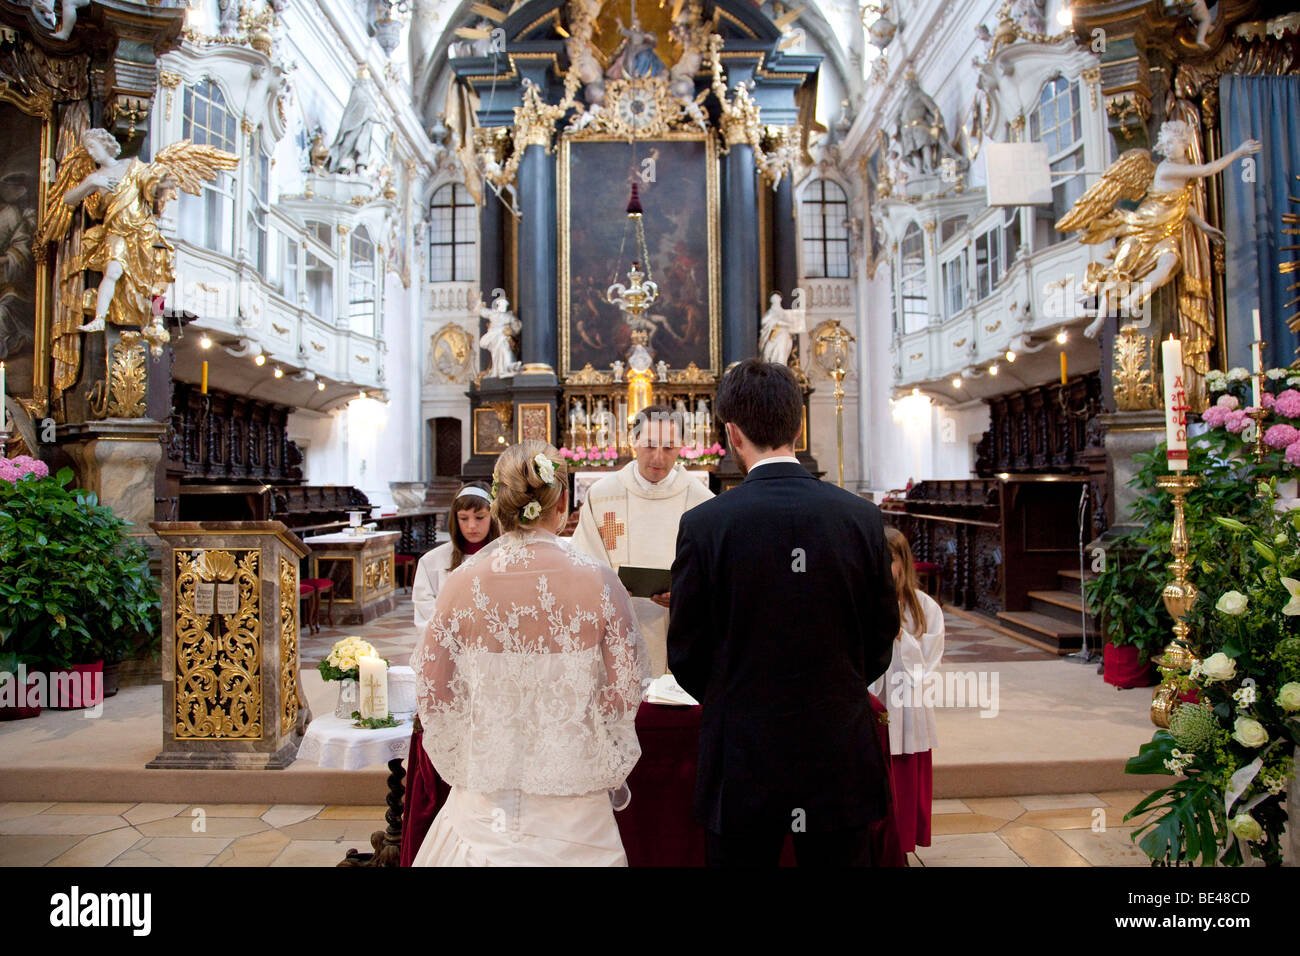 Bride and groom at their wedding in the Basilica of St. Emeran in Regensburg, Bavaria, Germany, Europe Stock Photo